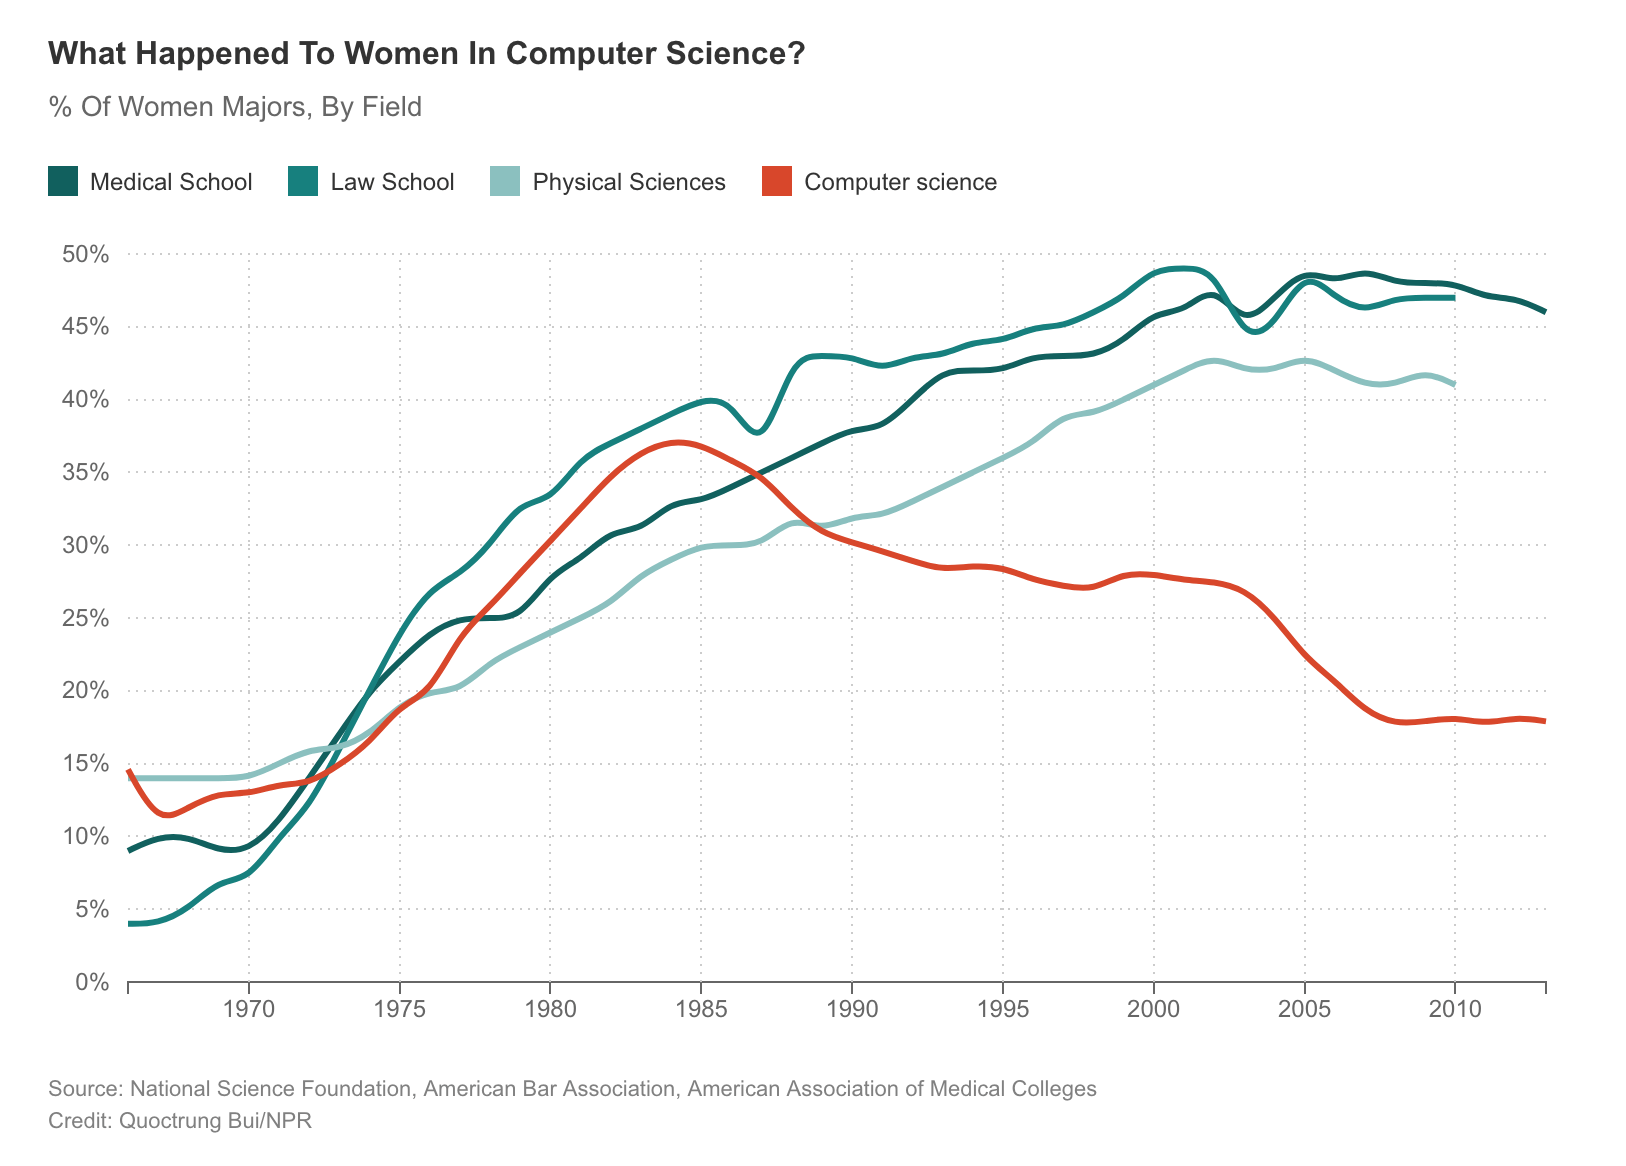 What happened to women in Computer Science?